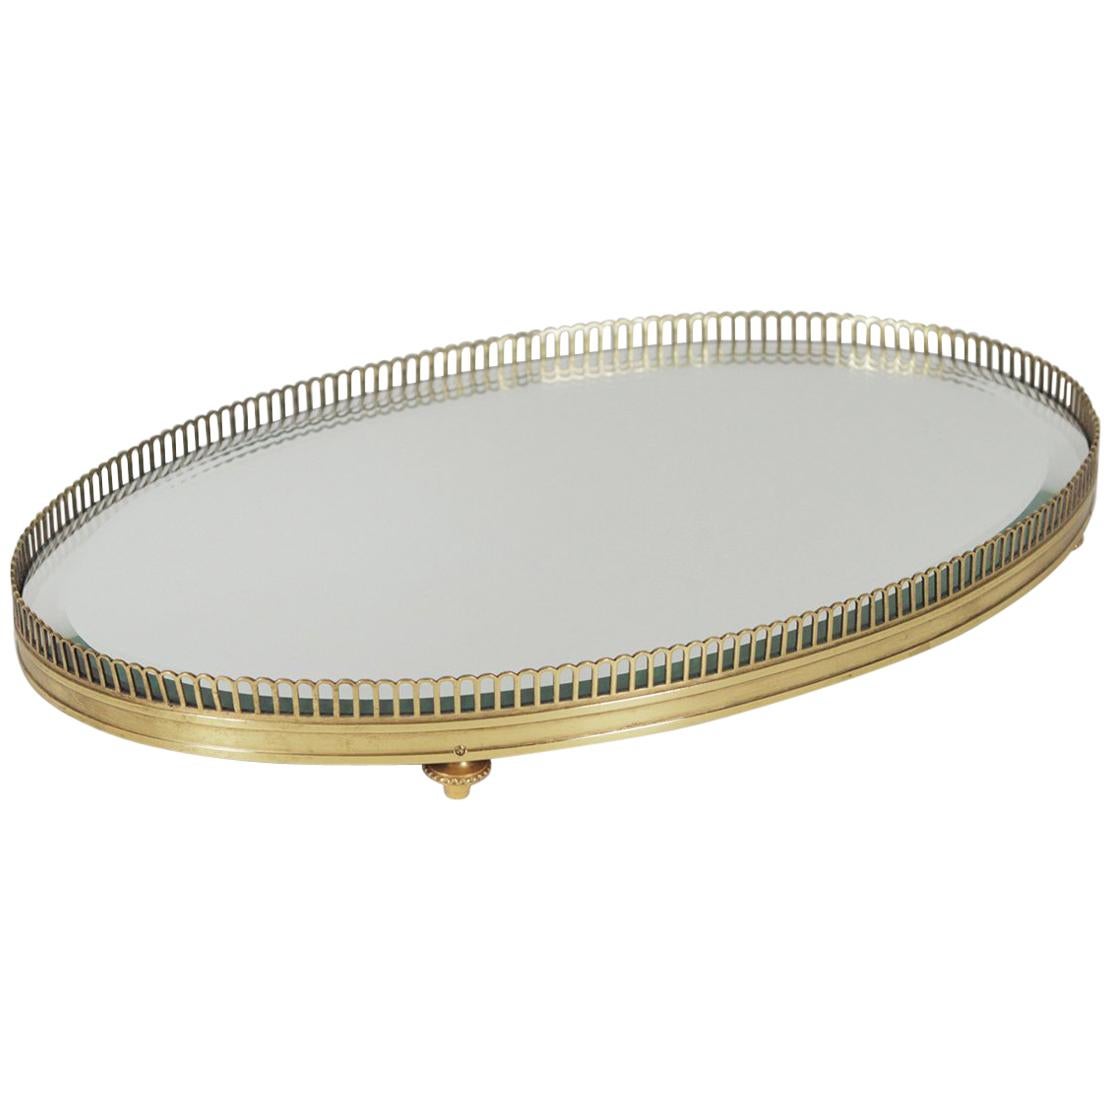 Gilt Reticulated Oval Dresser Tray